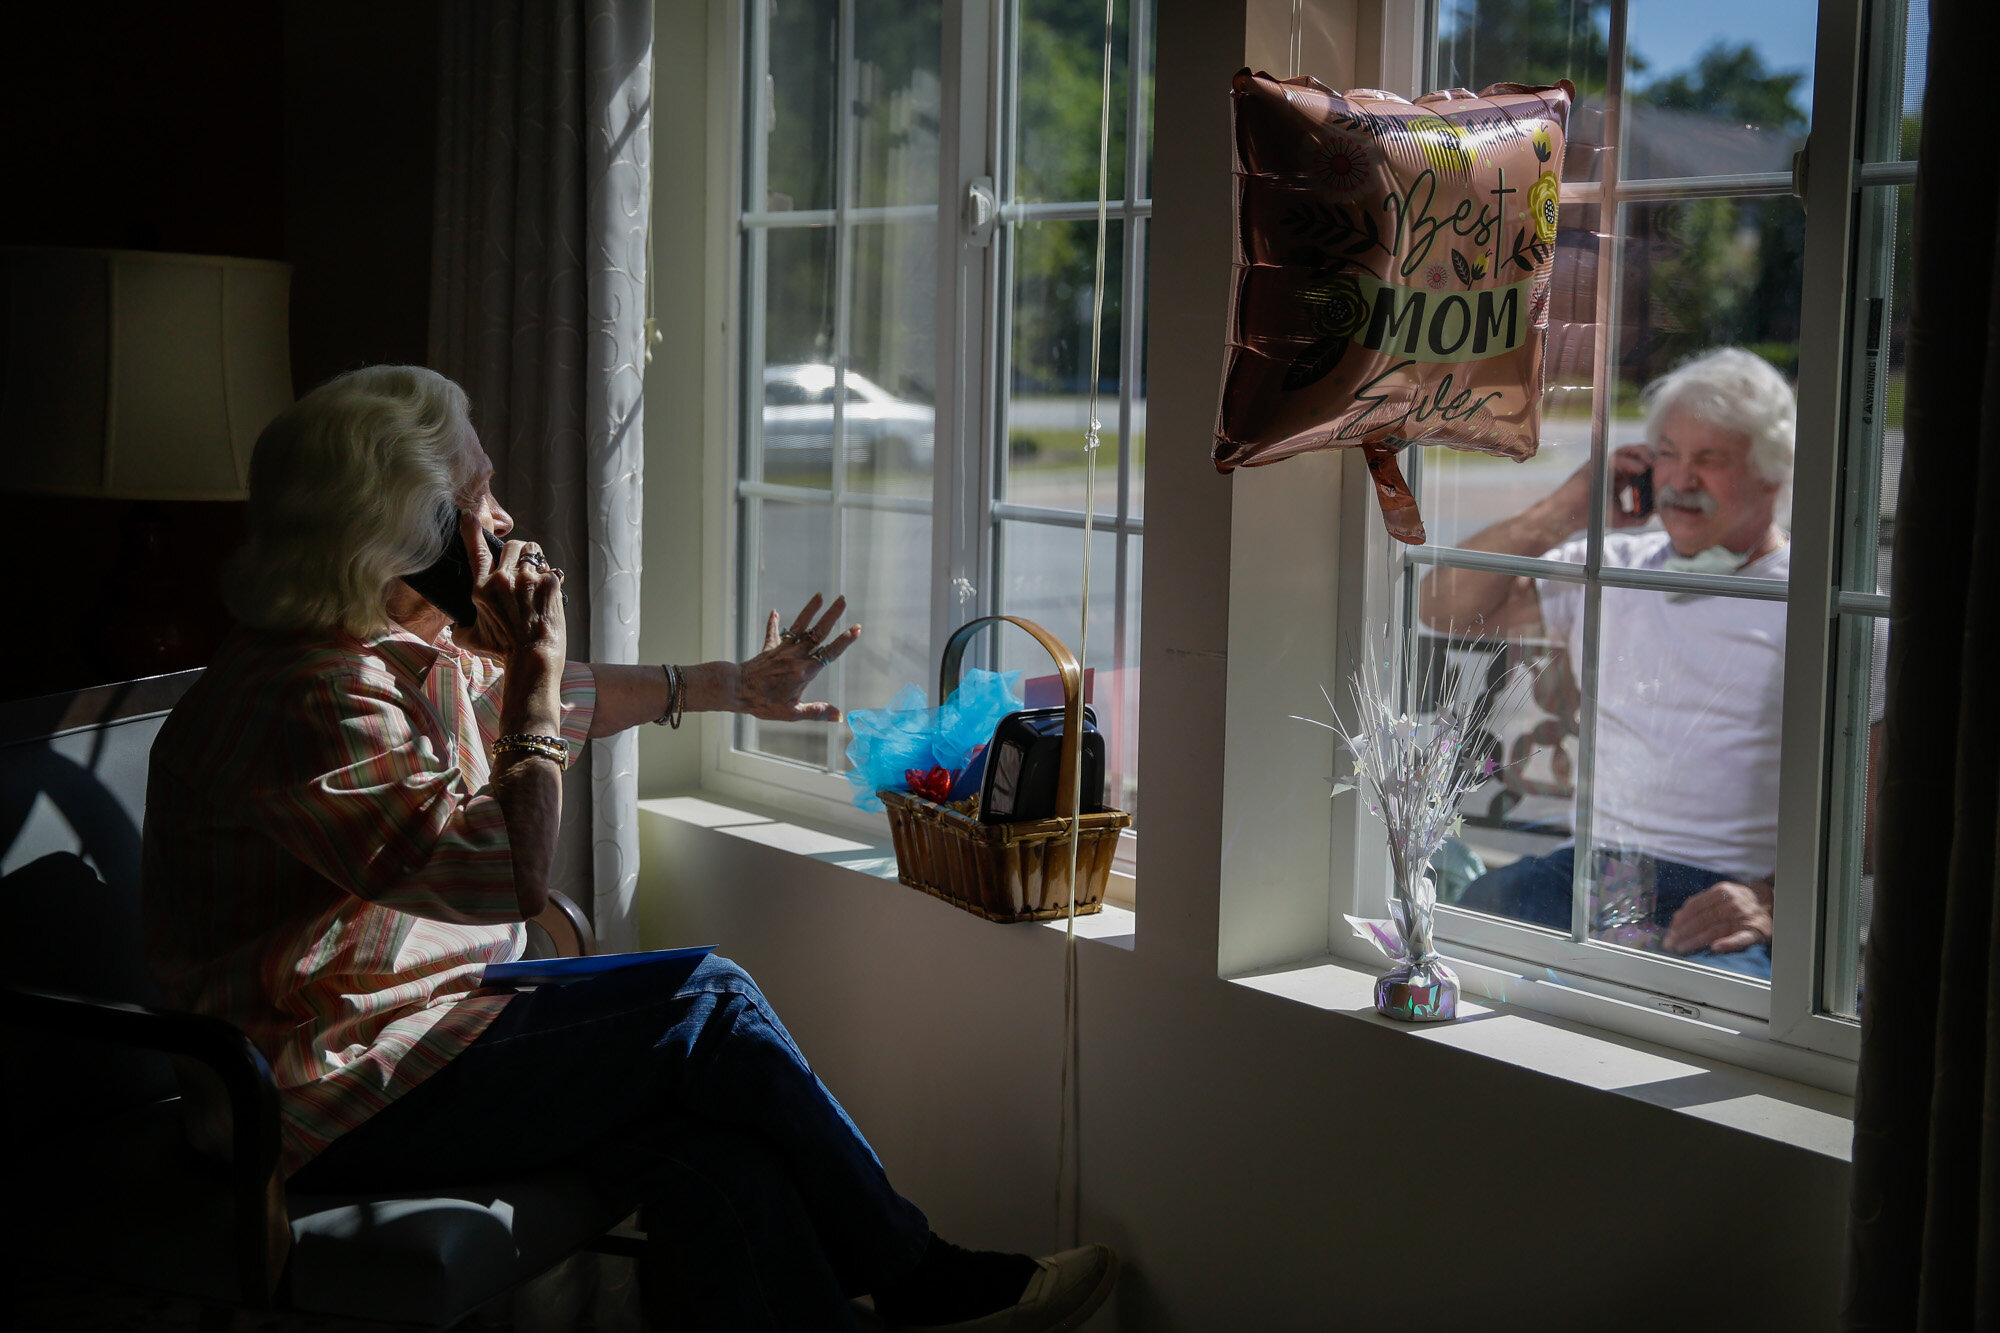  Mary Faye Cochran, 86, sings "You Are My Sunshine" over the phone to her son Stacey Smith through a window on Mother’s Day, Sunday, May 10, 2020, at Provident Village at Creekside senior living in Smyrna, Ga. (AP Photo/Brynn Anderson) 